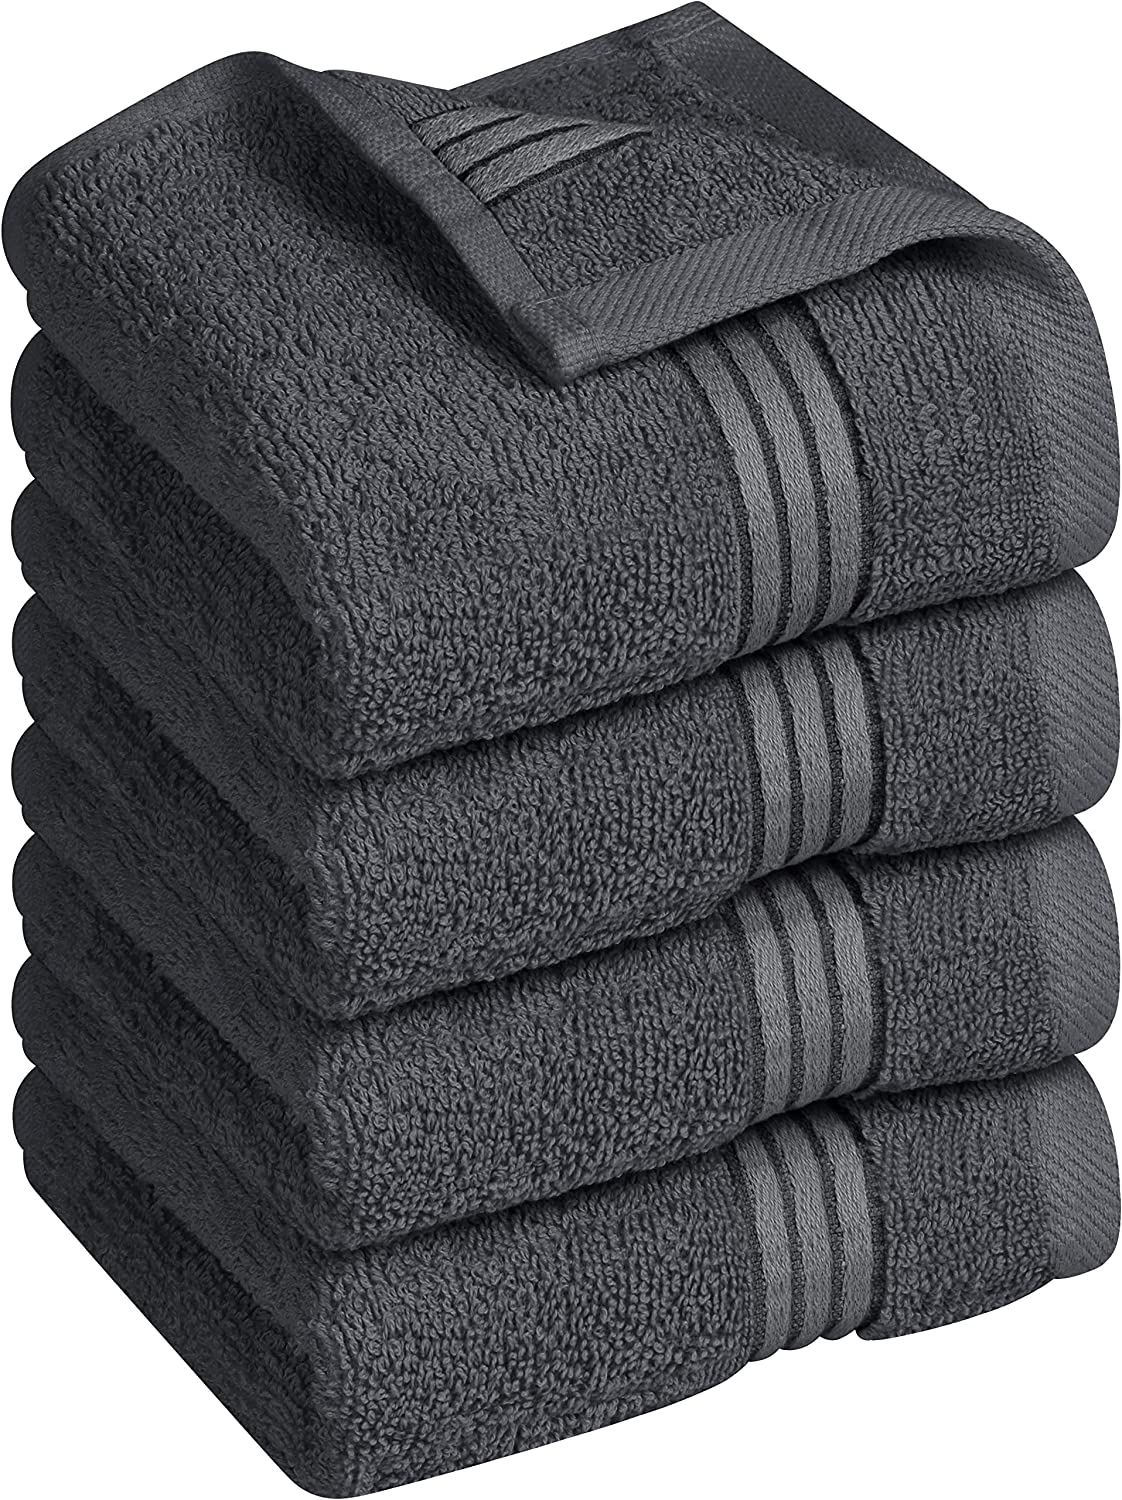 Utopia Towels 4 Piece Hand Towels Set, (16 x 28 inches) 100% Ring